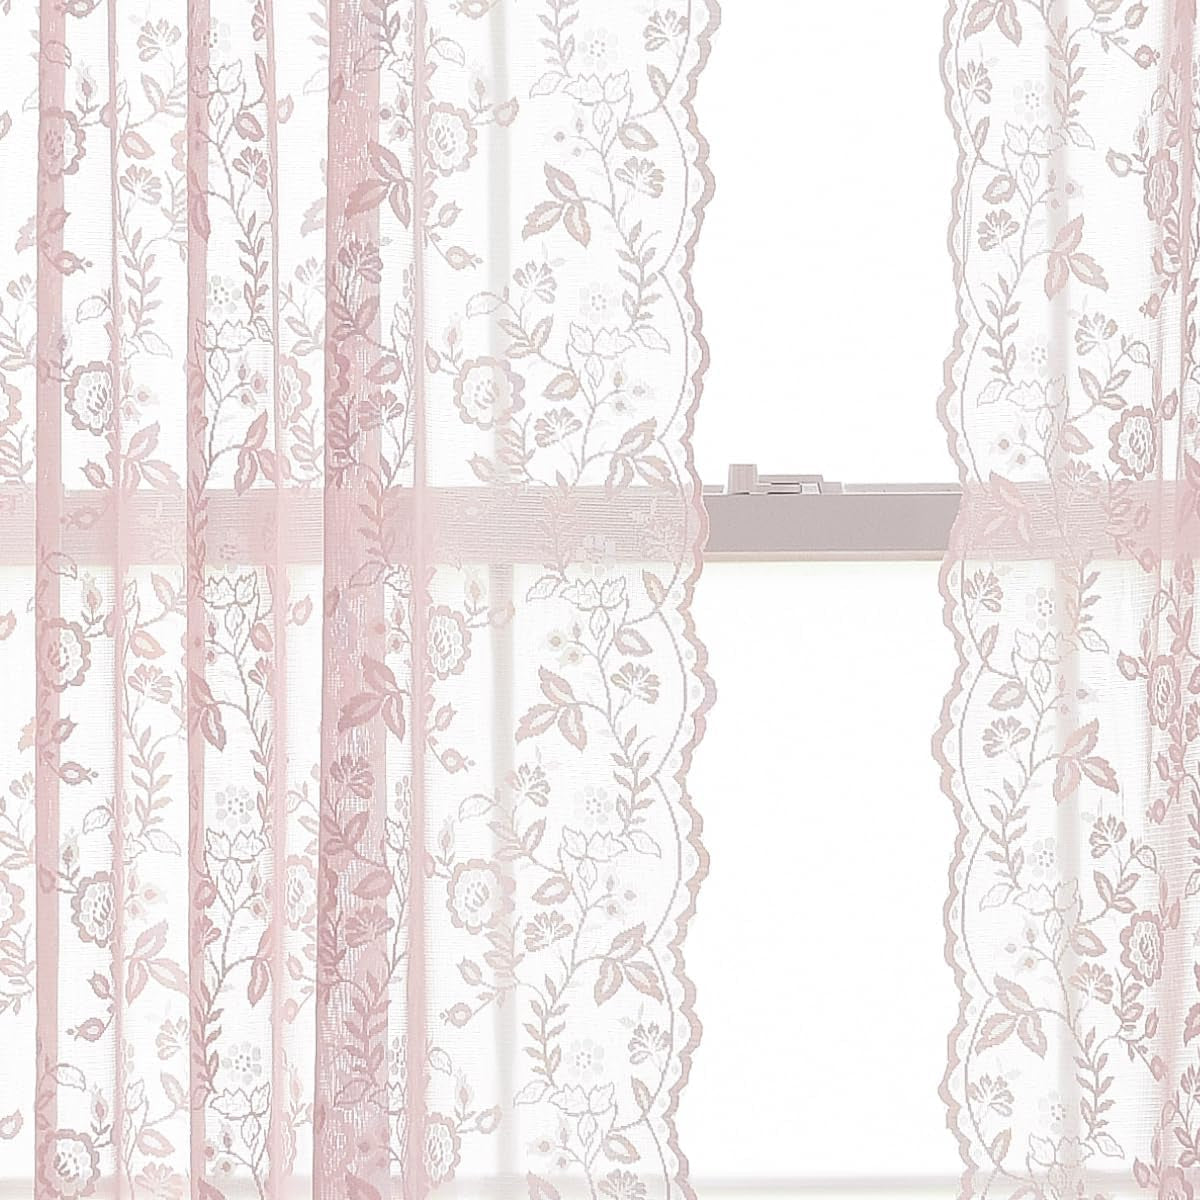 FINECITY Lace Curtains Country Rustic Floral Sheer Curtains for Living Room 72 Inch Length Drapes Vintage Floral Pattern Farmhouse Privacy Light Filtering Sheer Curtain 2 Panels, 52 X 72 Inch, Grey  Keyu Textile Pink W52 X L63 Inch 